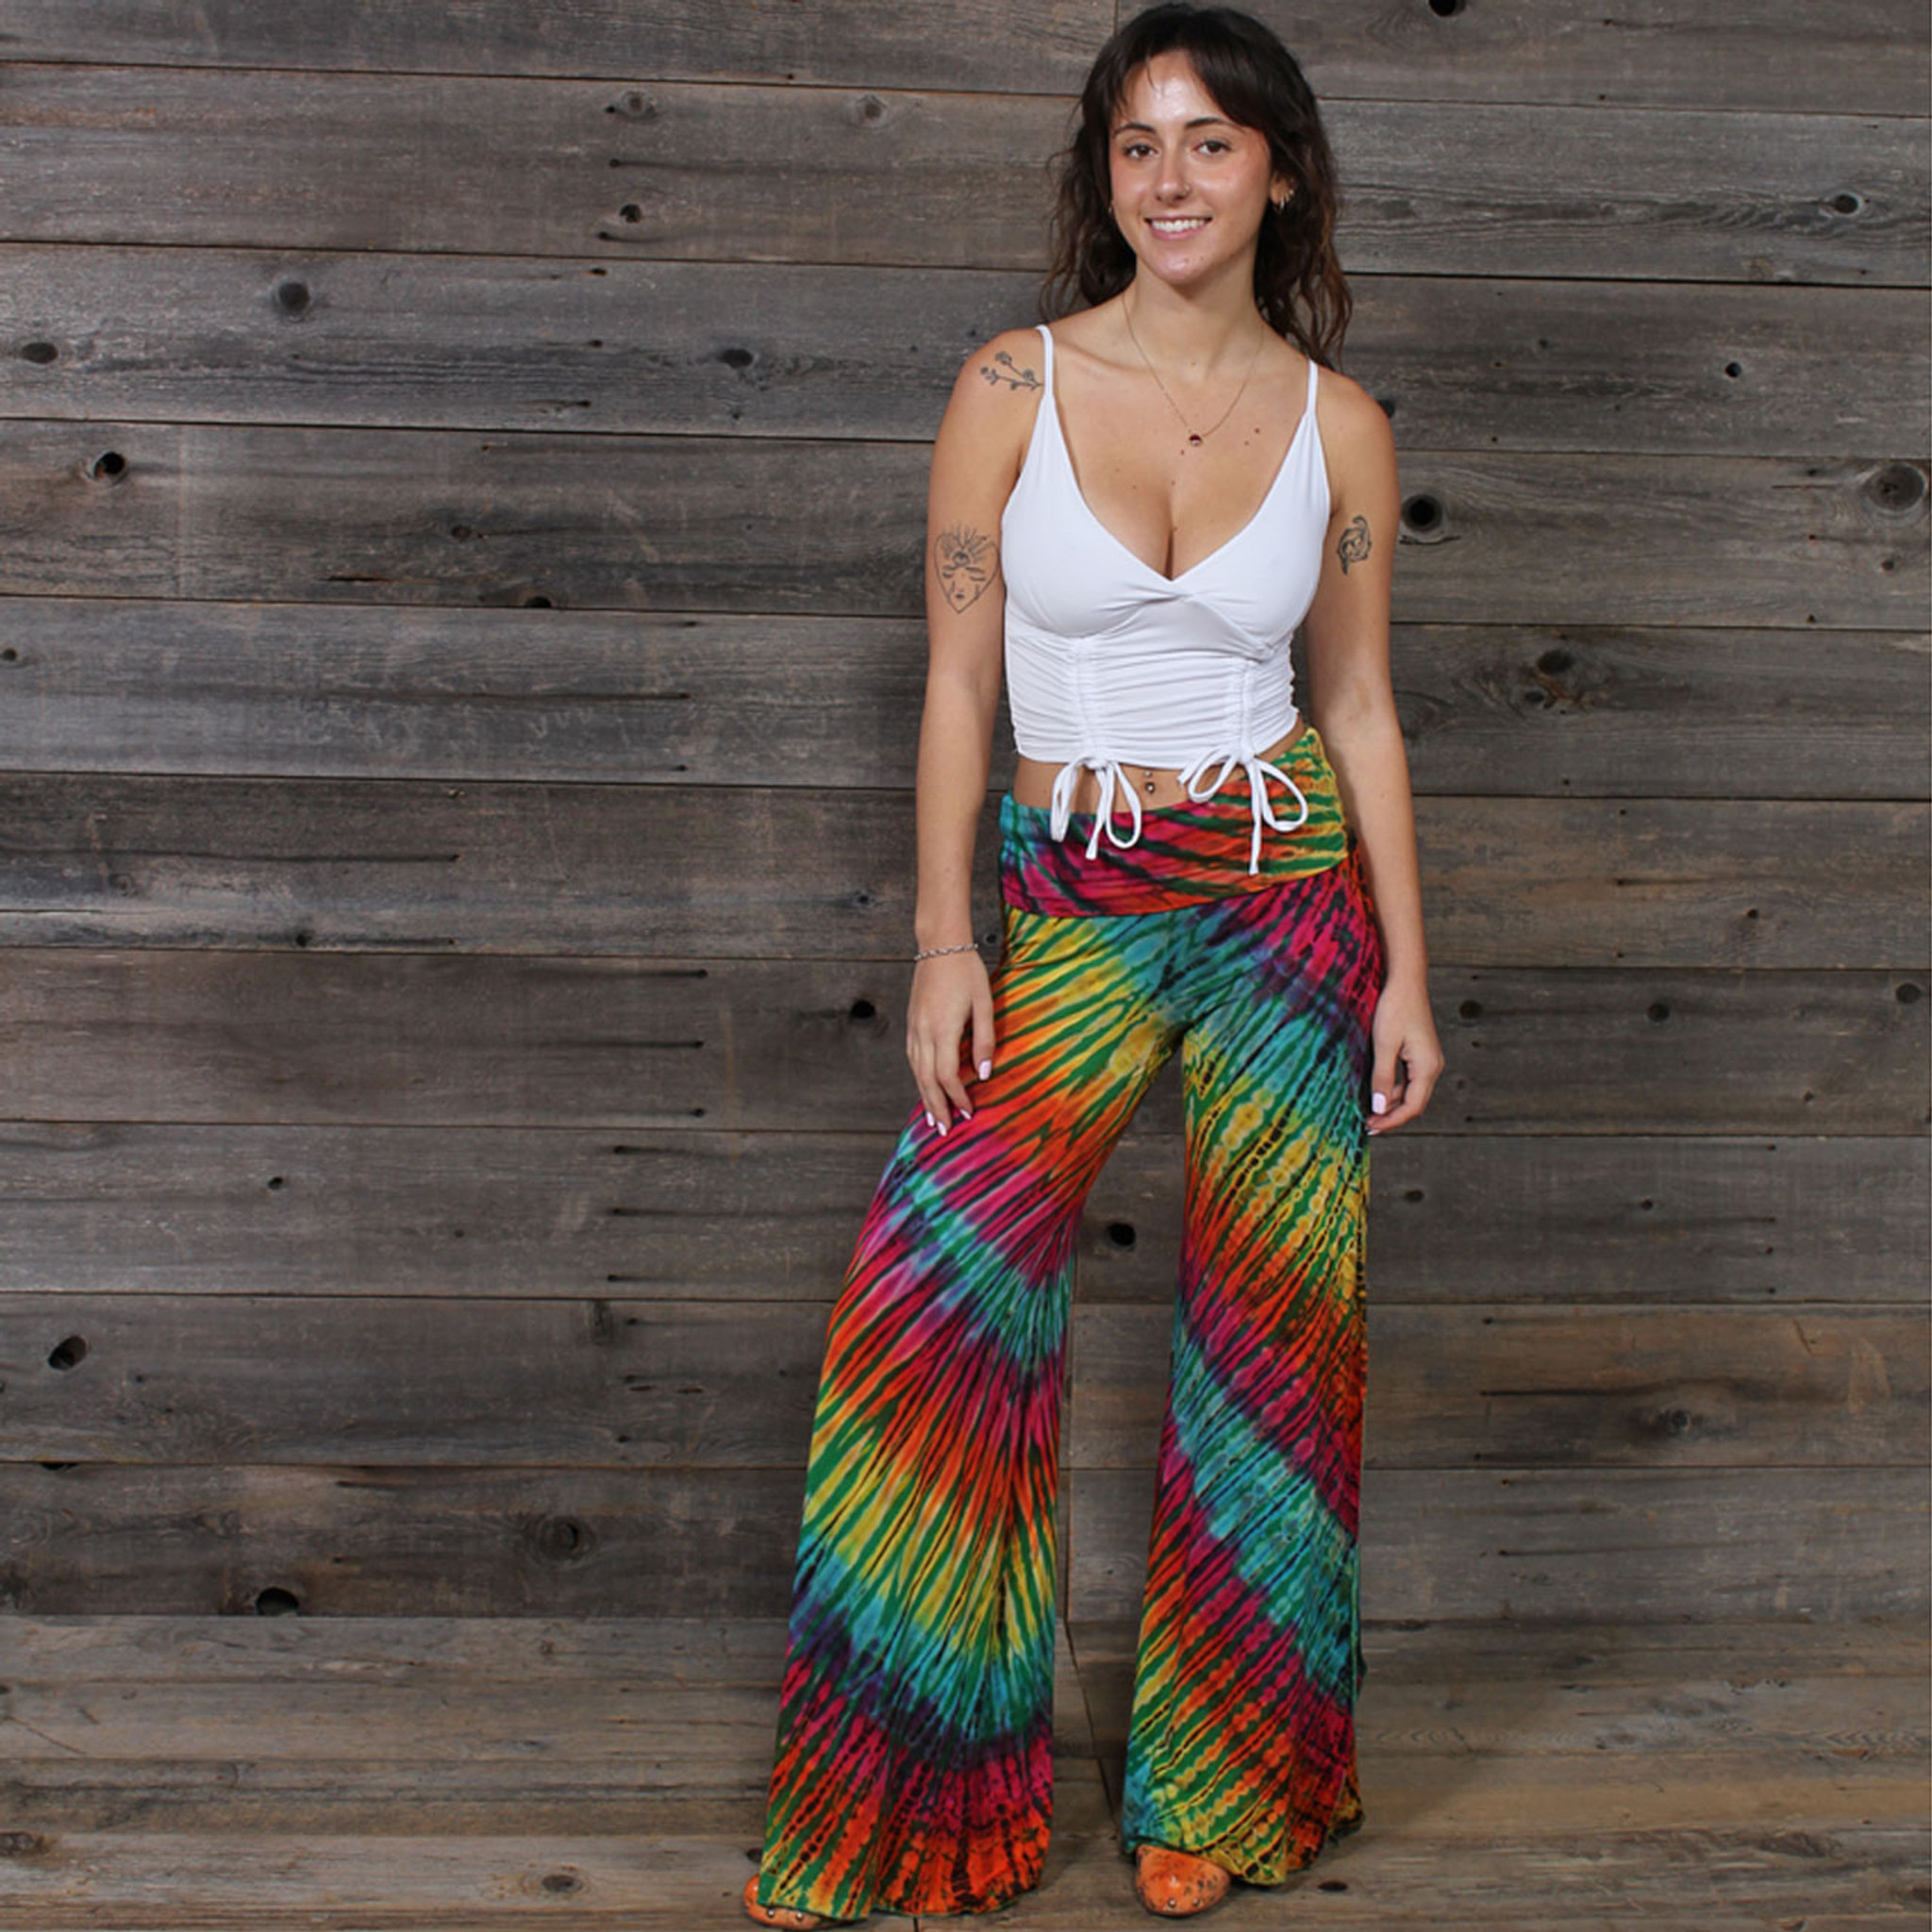 Check out these palazzo pants I tie dyed 🕺🌈 : r/RainbowEverything